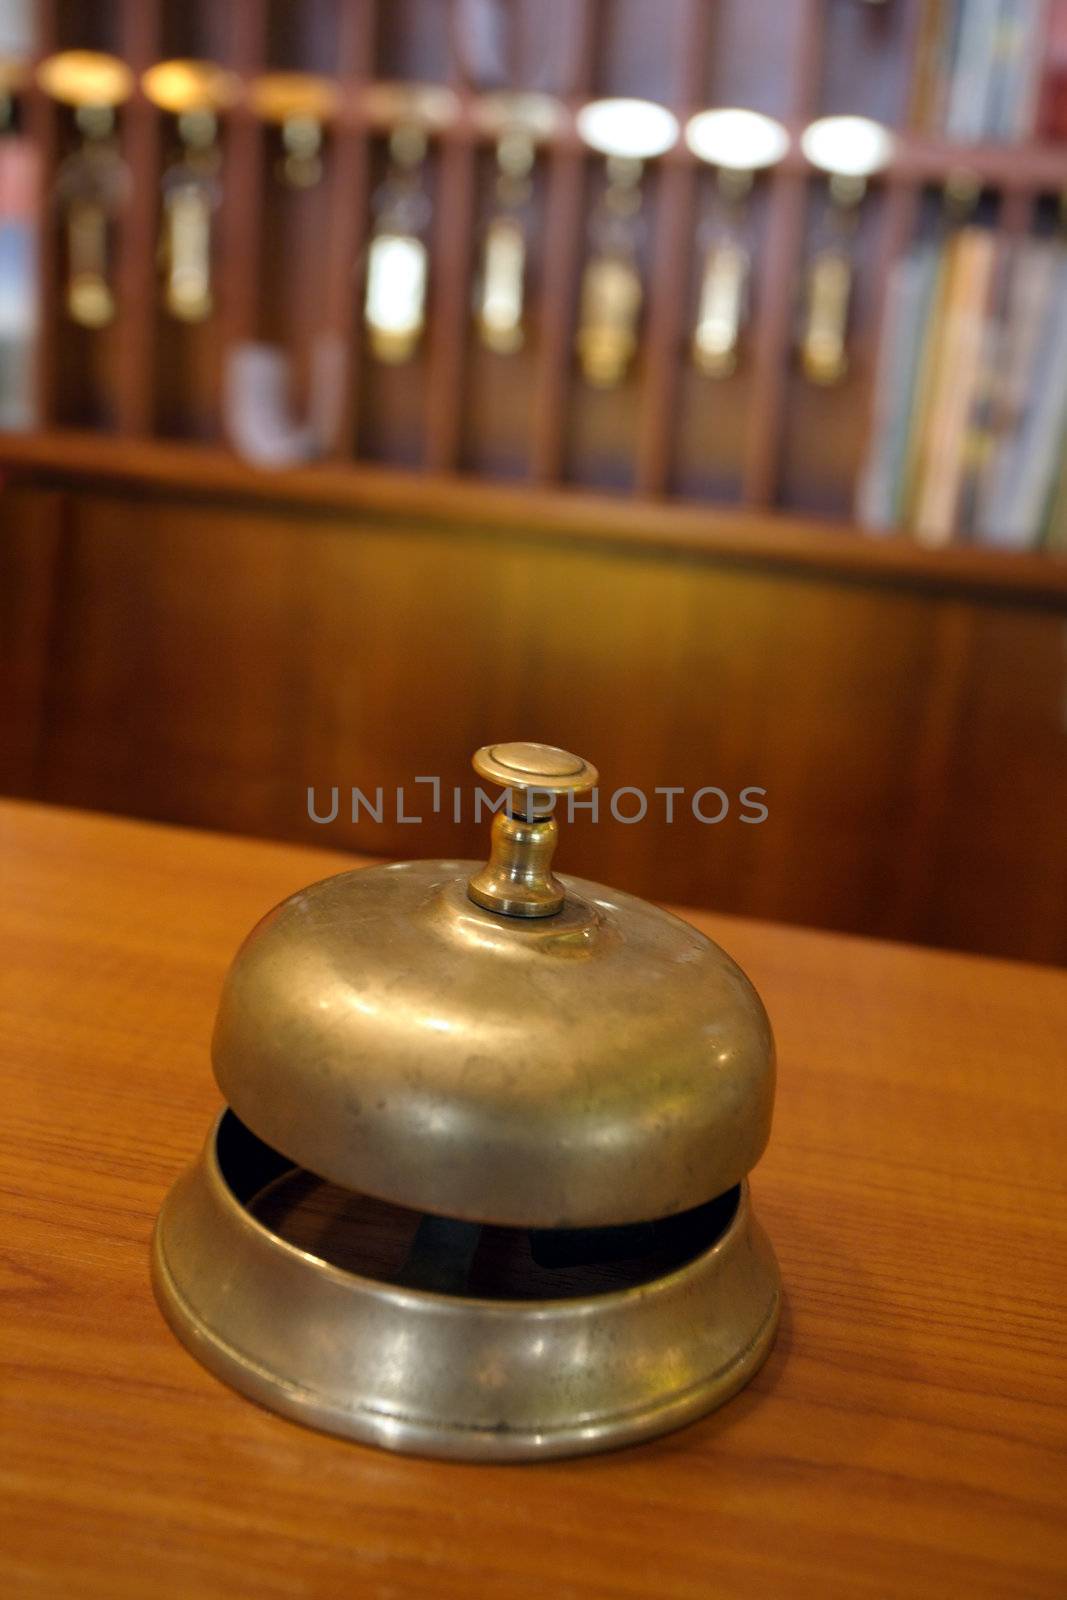 Vintage brass bell on hotel front desk with blurred key rack in the background. Very shallow depth of field with focus on the button.
